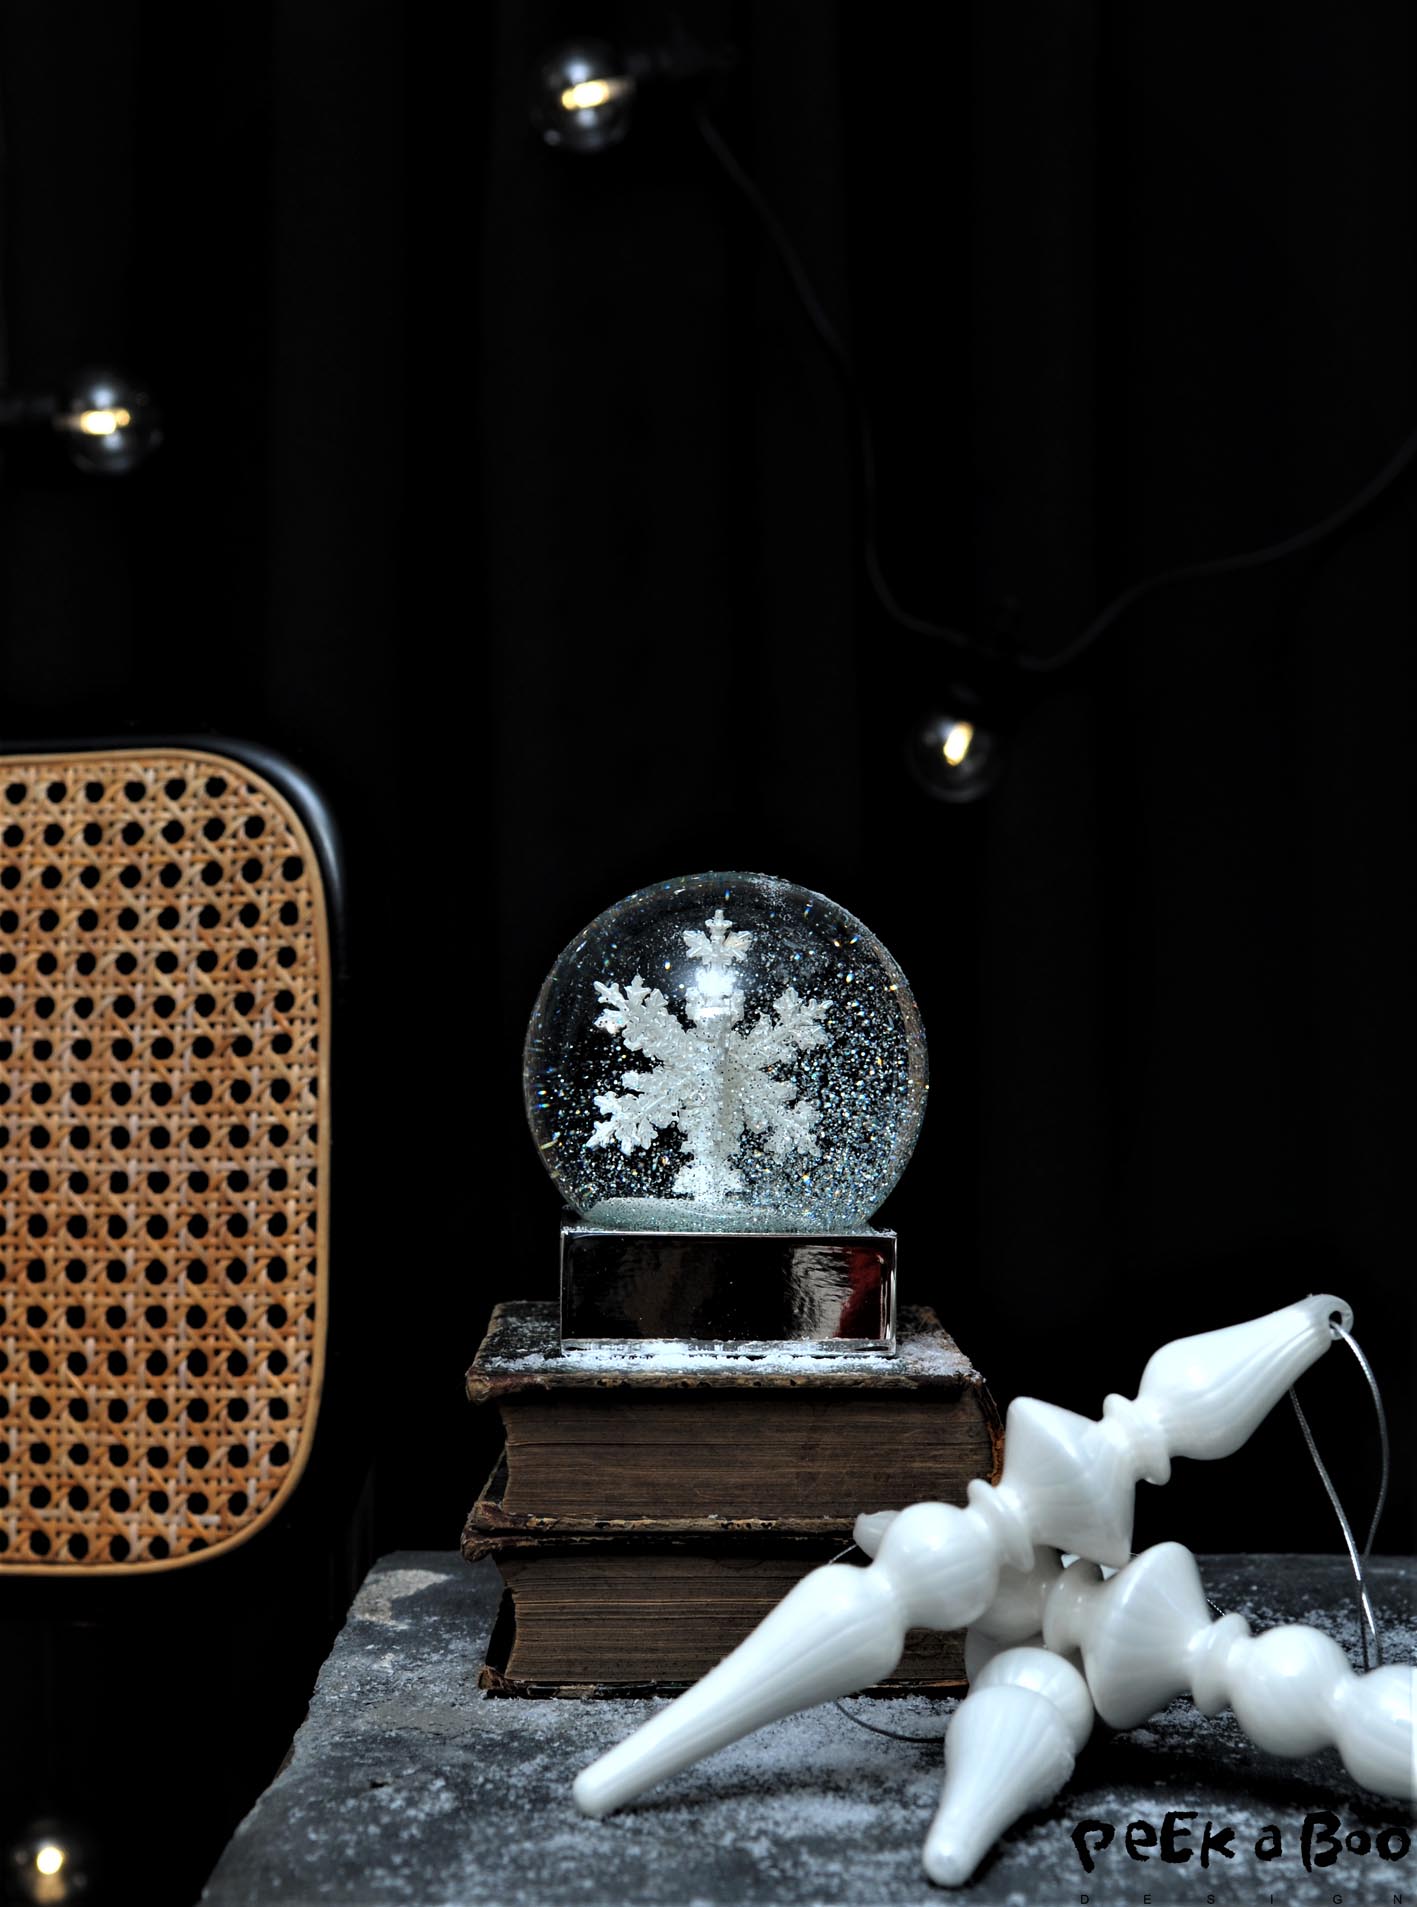 The snowflake snow globe you can win. It is all handmade and the most calming object to have in your home.